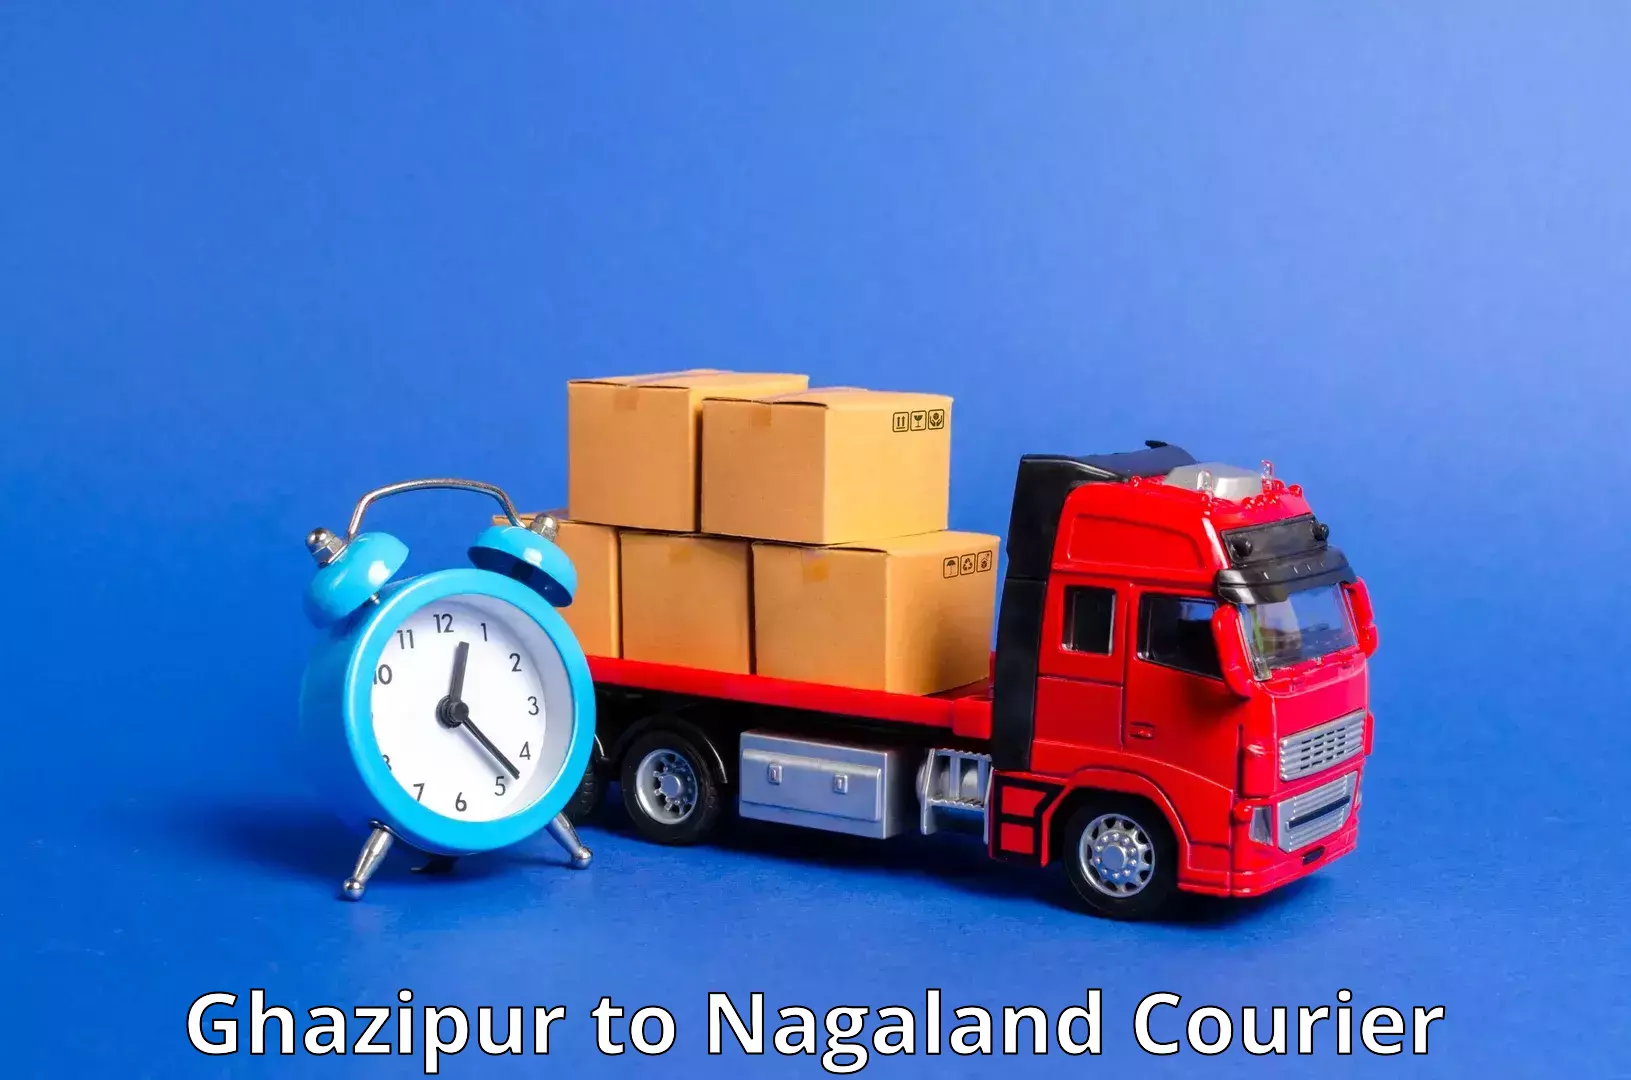 High-speed parcel service Ghazipur to Kohima